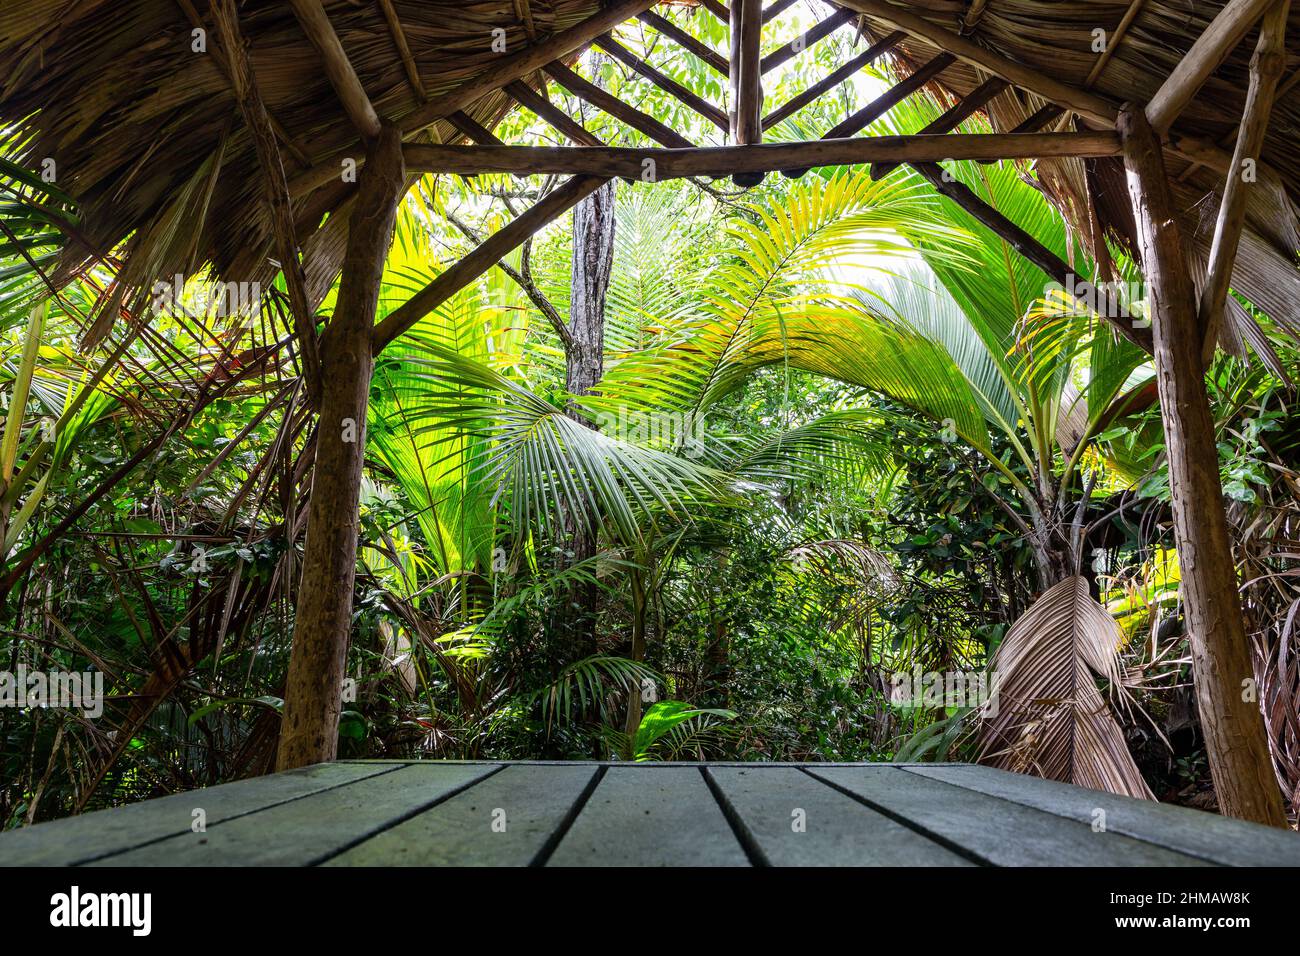 Wooden shelter with thatched roof made of palm leaves in tropical rainforest on Glacis Noire Nature Trail, Praslin Island, Seychelles. Stock Photo